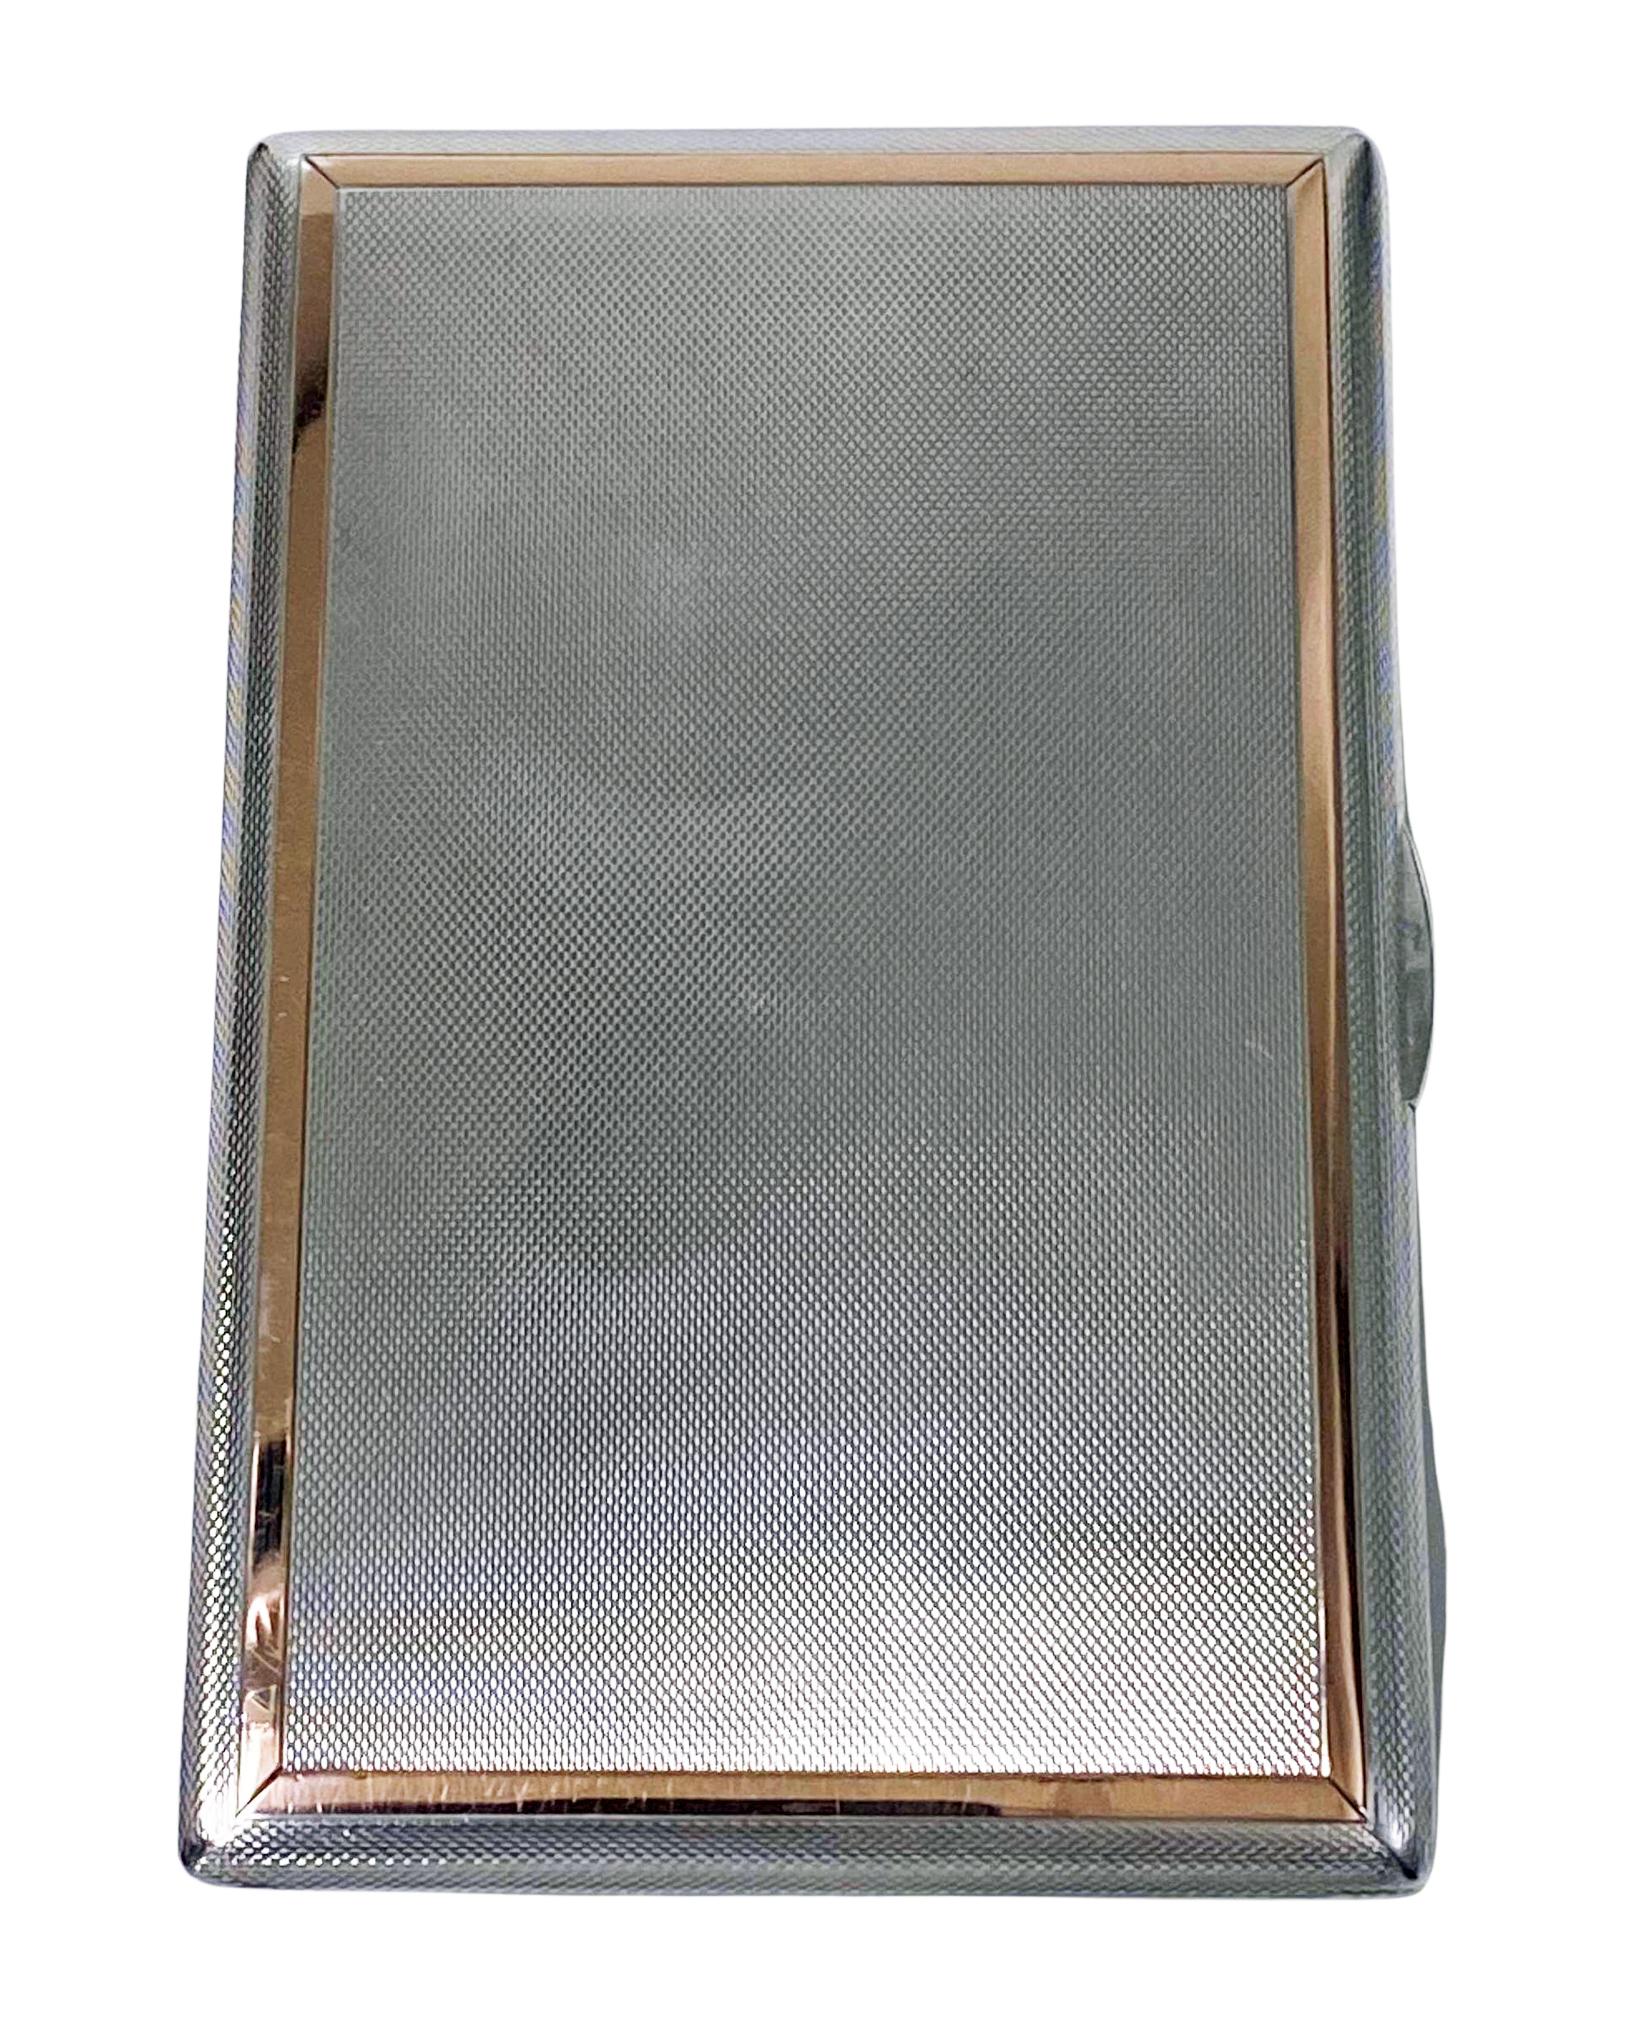 Sterling Silver and Gold Cigarette or Card Case London 1960 Padget & Braham In Good Condition For Sale In Toronto, ON